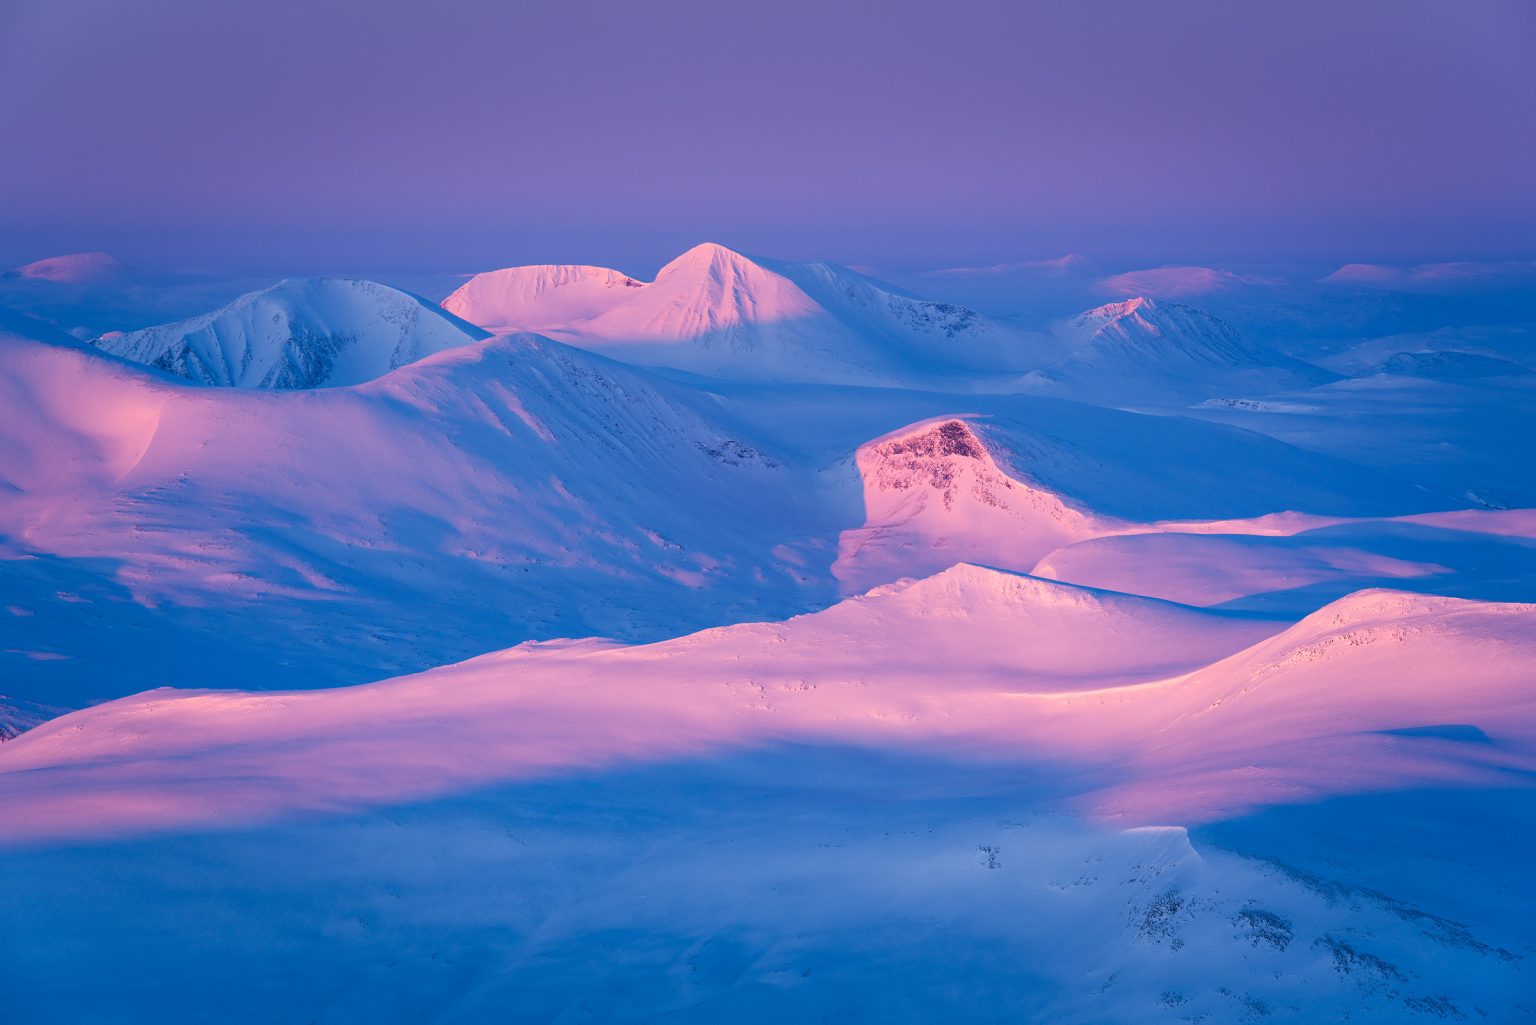 Sunrise over the winter mountains of Sarek and Staika.